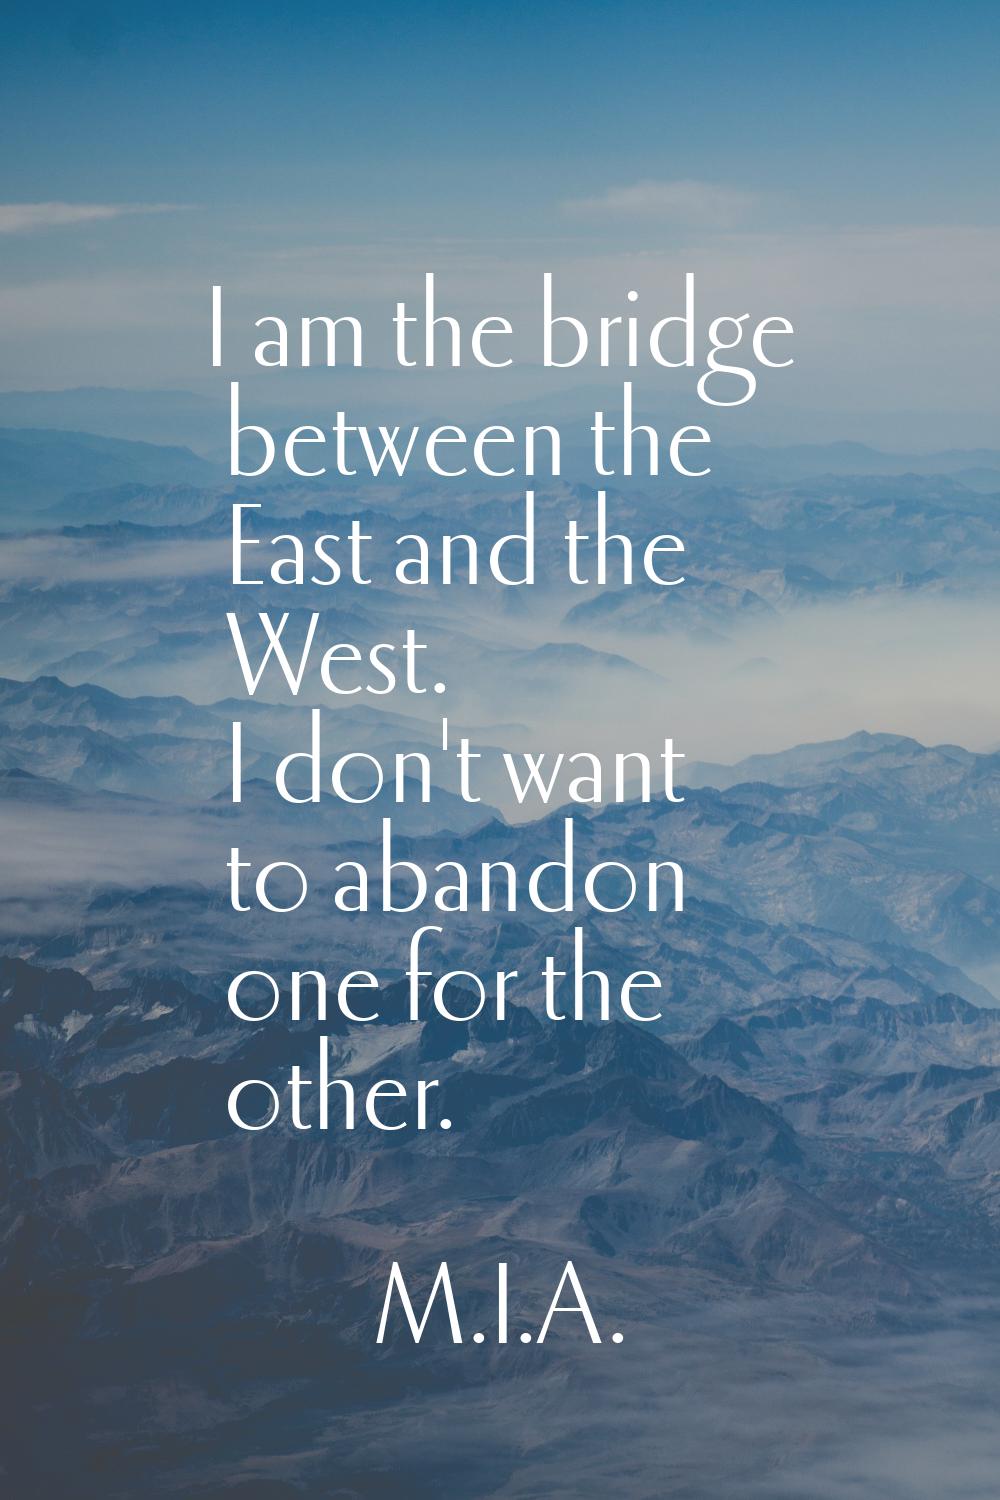 I am the bridge between the East and the West. I don't want to abandon one for the other.